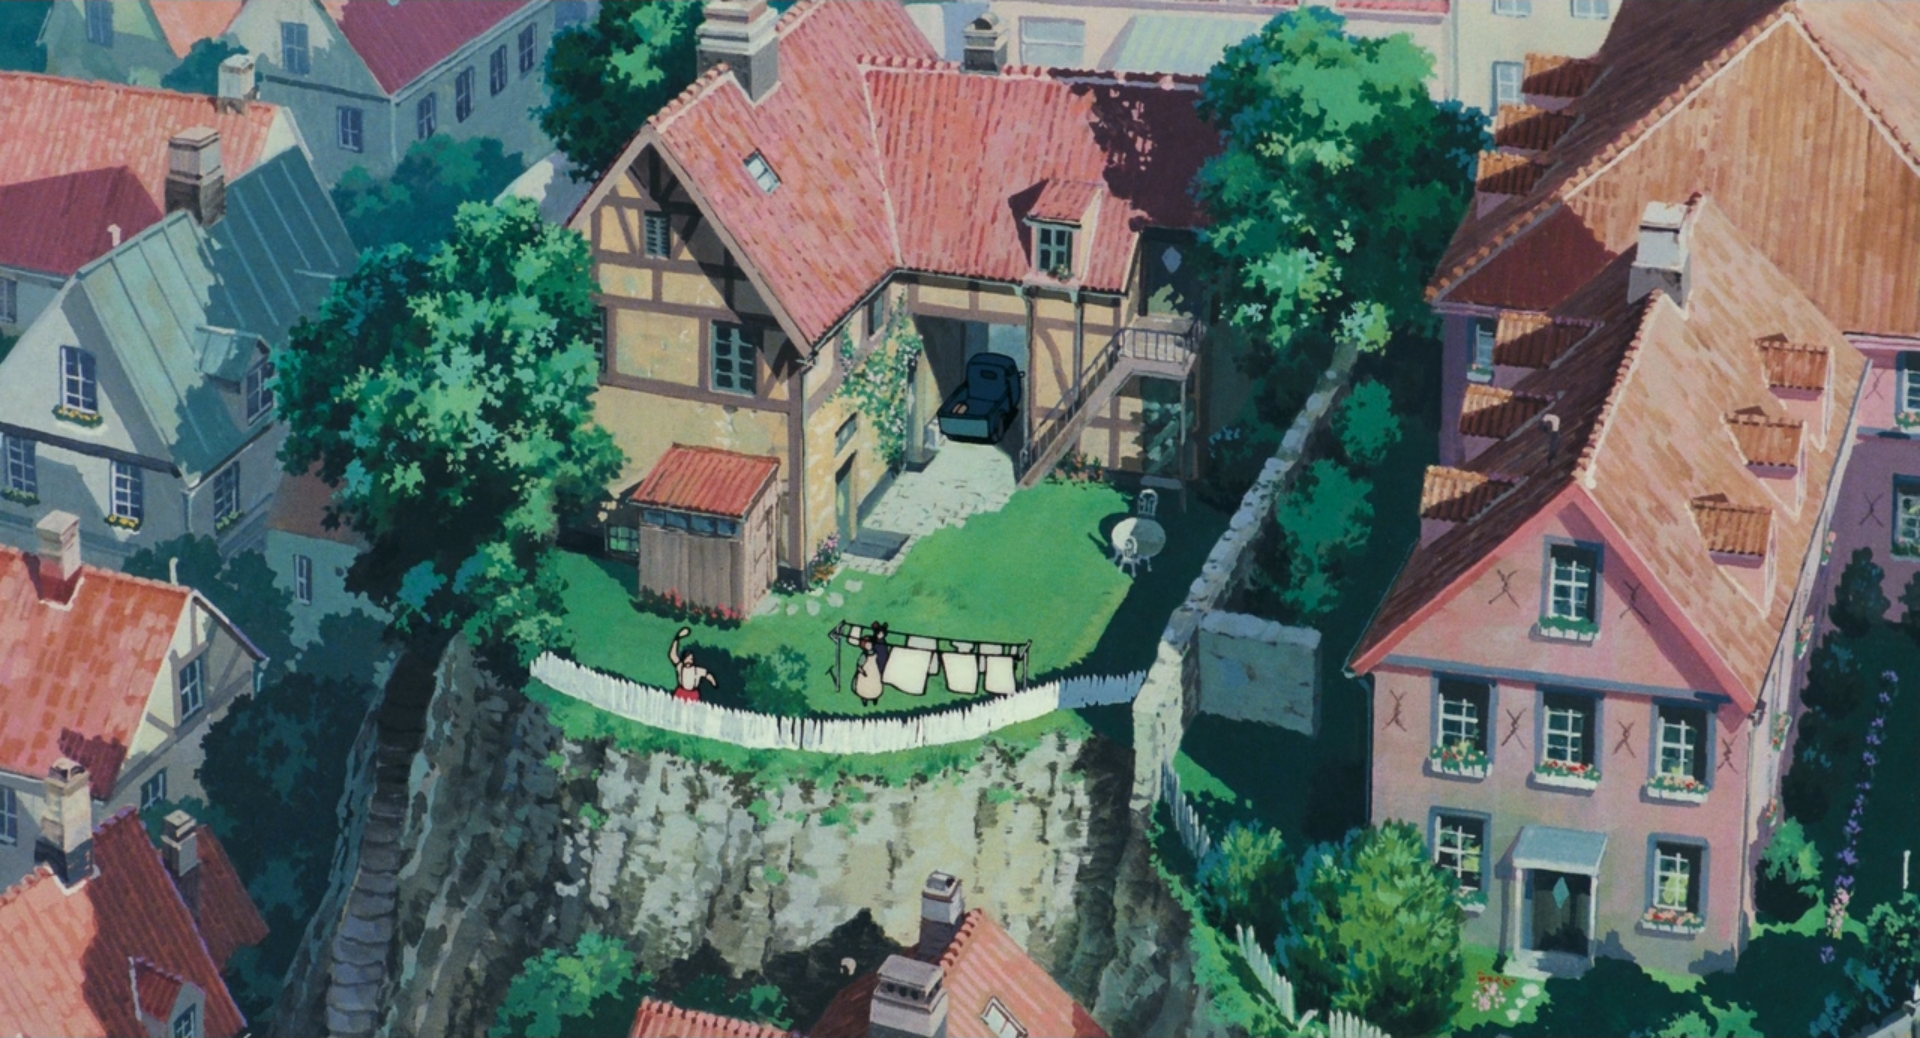 Kiki'S Delivery Service Screenshots Wallpapers